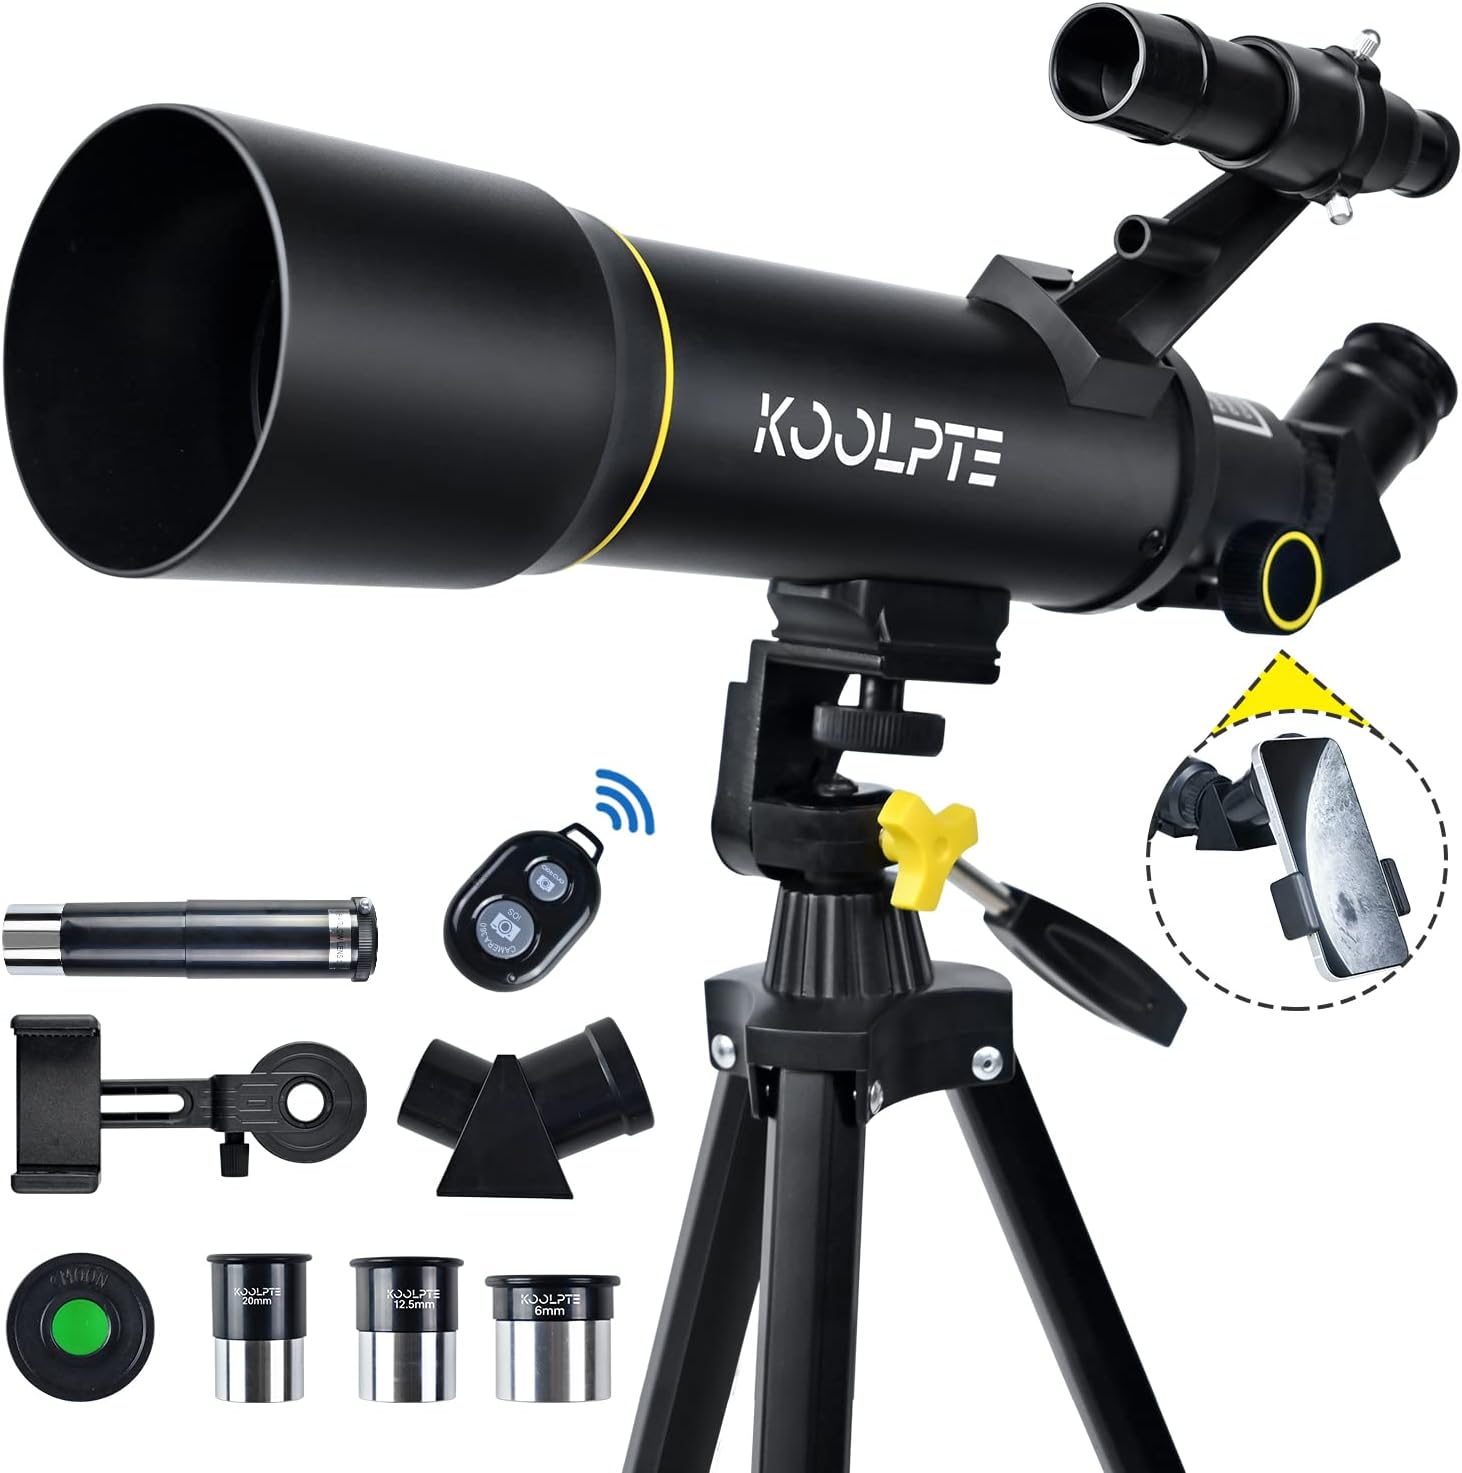 Koolpte Telescope, 70mm Aperture 400mm AZ Mount Astronomical Refracting Telescope (20x-200x) for Kids Adults, Portable Travel Telescope with Tripod Phone Adapter, Remote Control, Easy to Use, Black